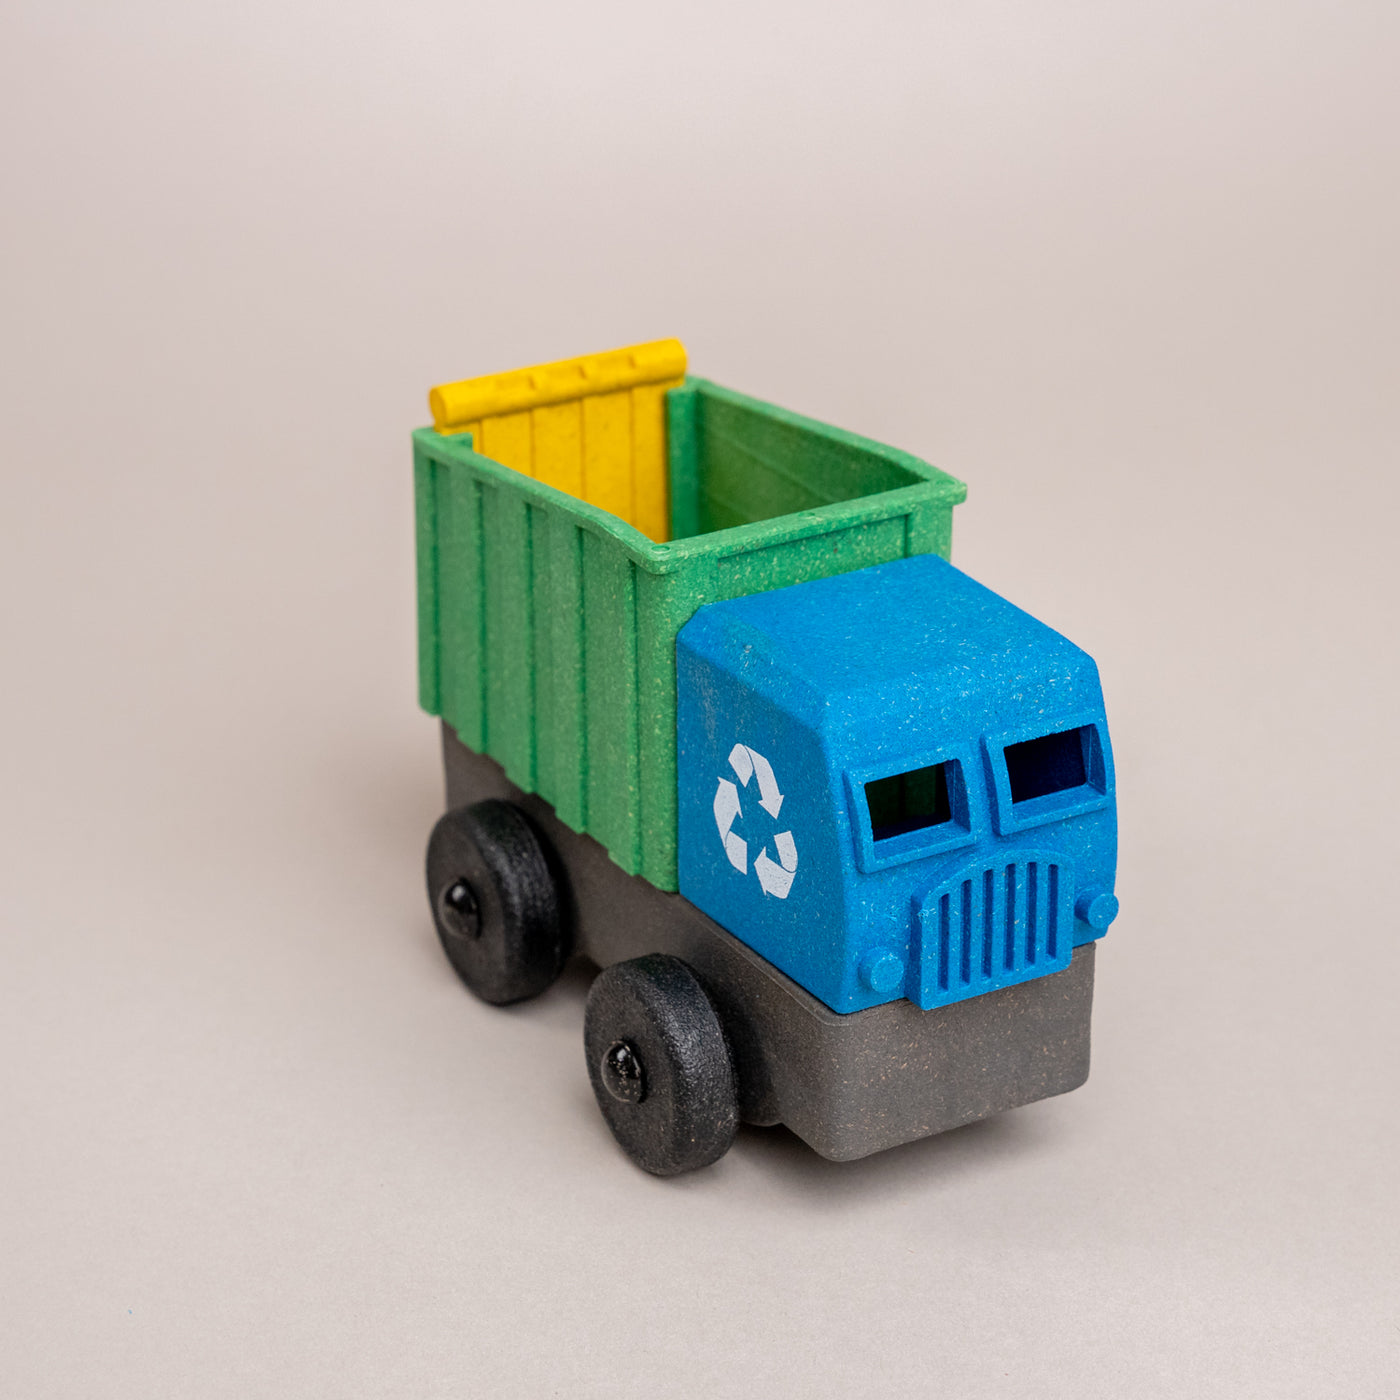 Luke's Toy Factory Classic Recycling Truck